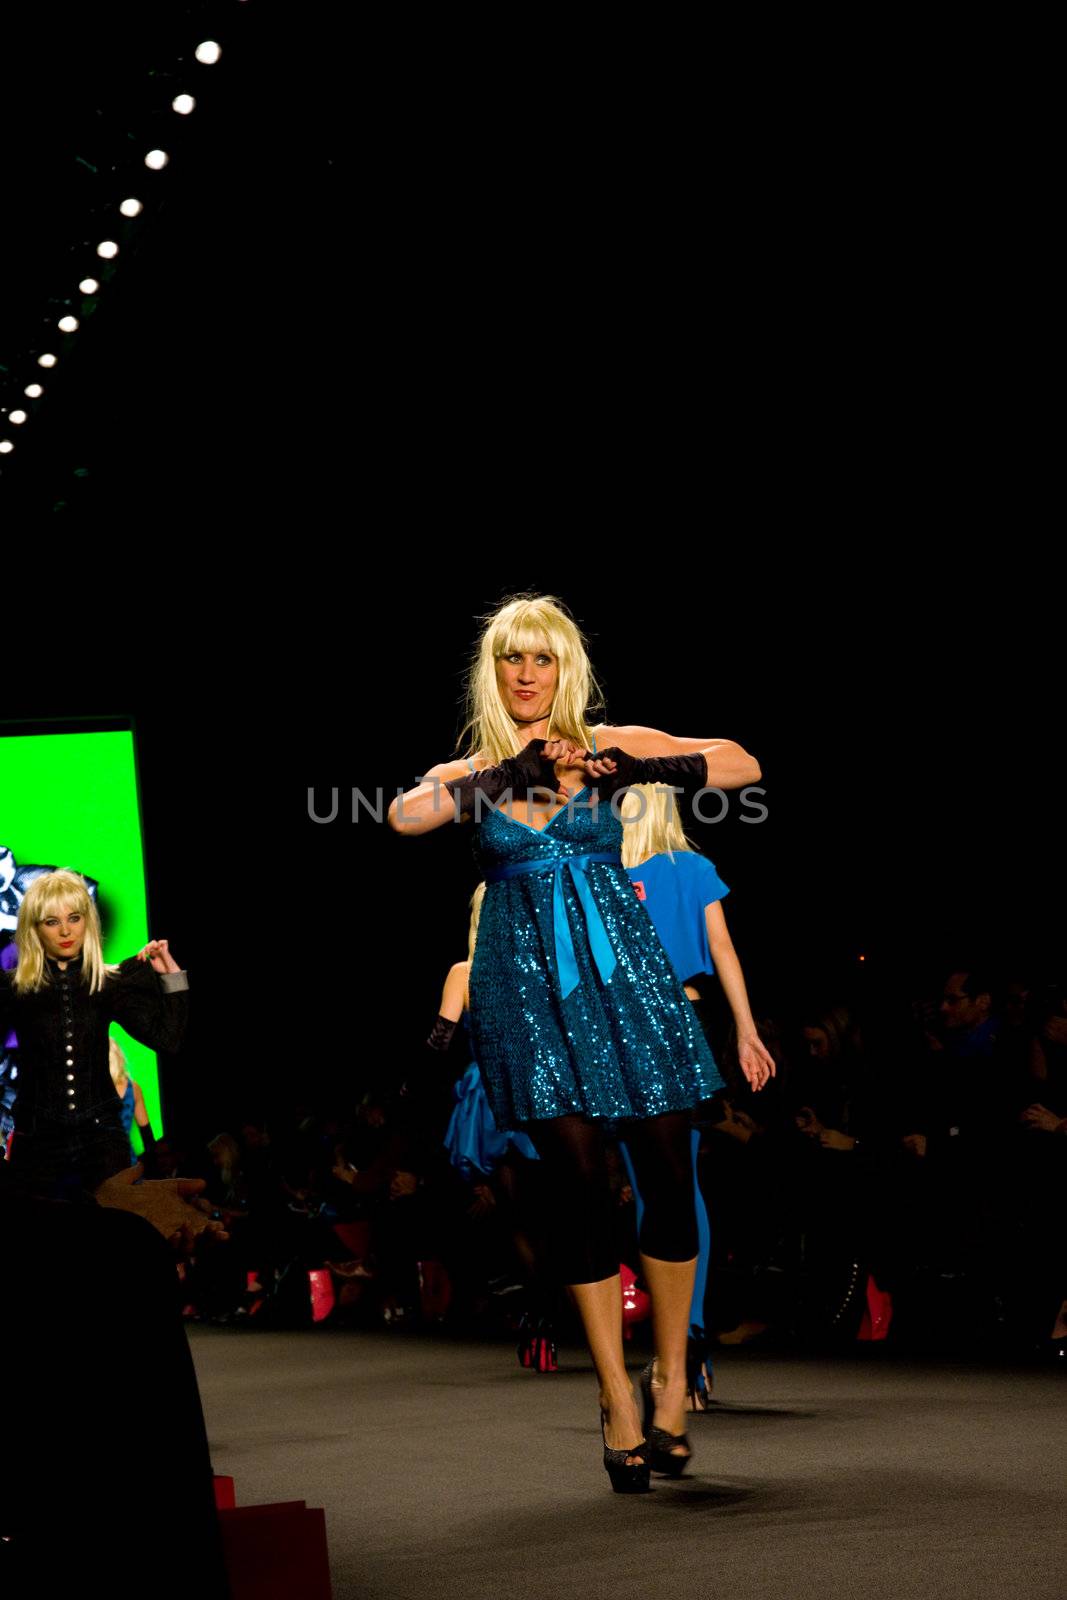 NEW YORK, NY - FEBRUARY 14: A model/coworker walks the runway at the Betsey Johnson Fall 2011 fashion show during Mercedes-Benz Fashion Week at The Theatre at Lincoln Center on February 14, 2011 in New York City. (Photo by Diana Beato)